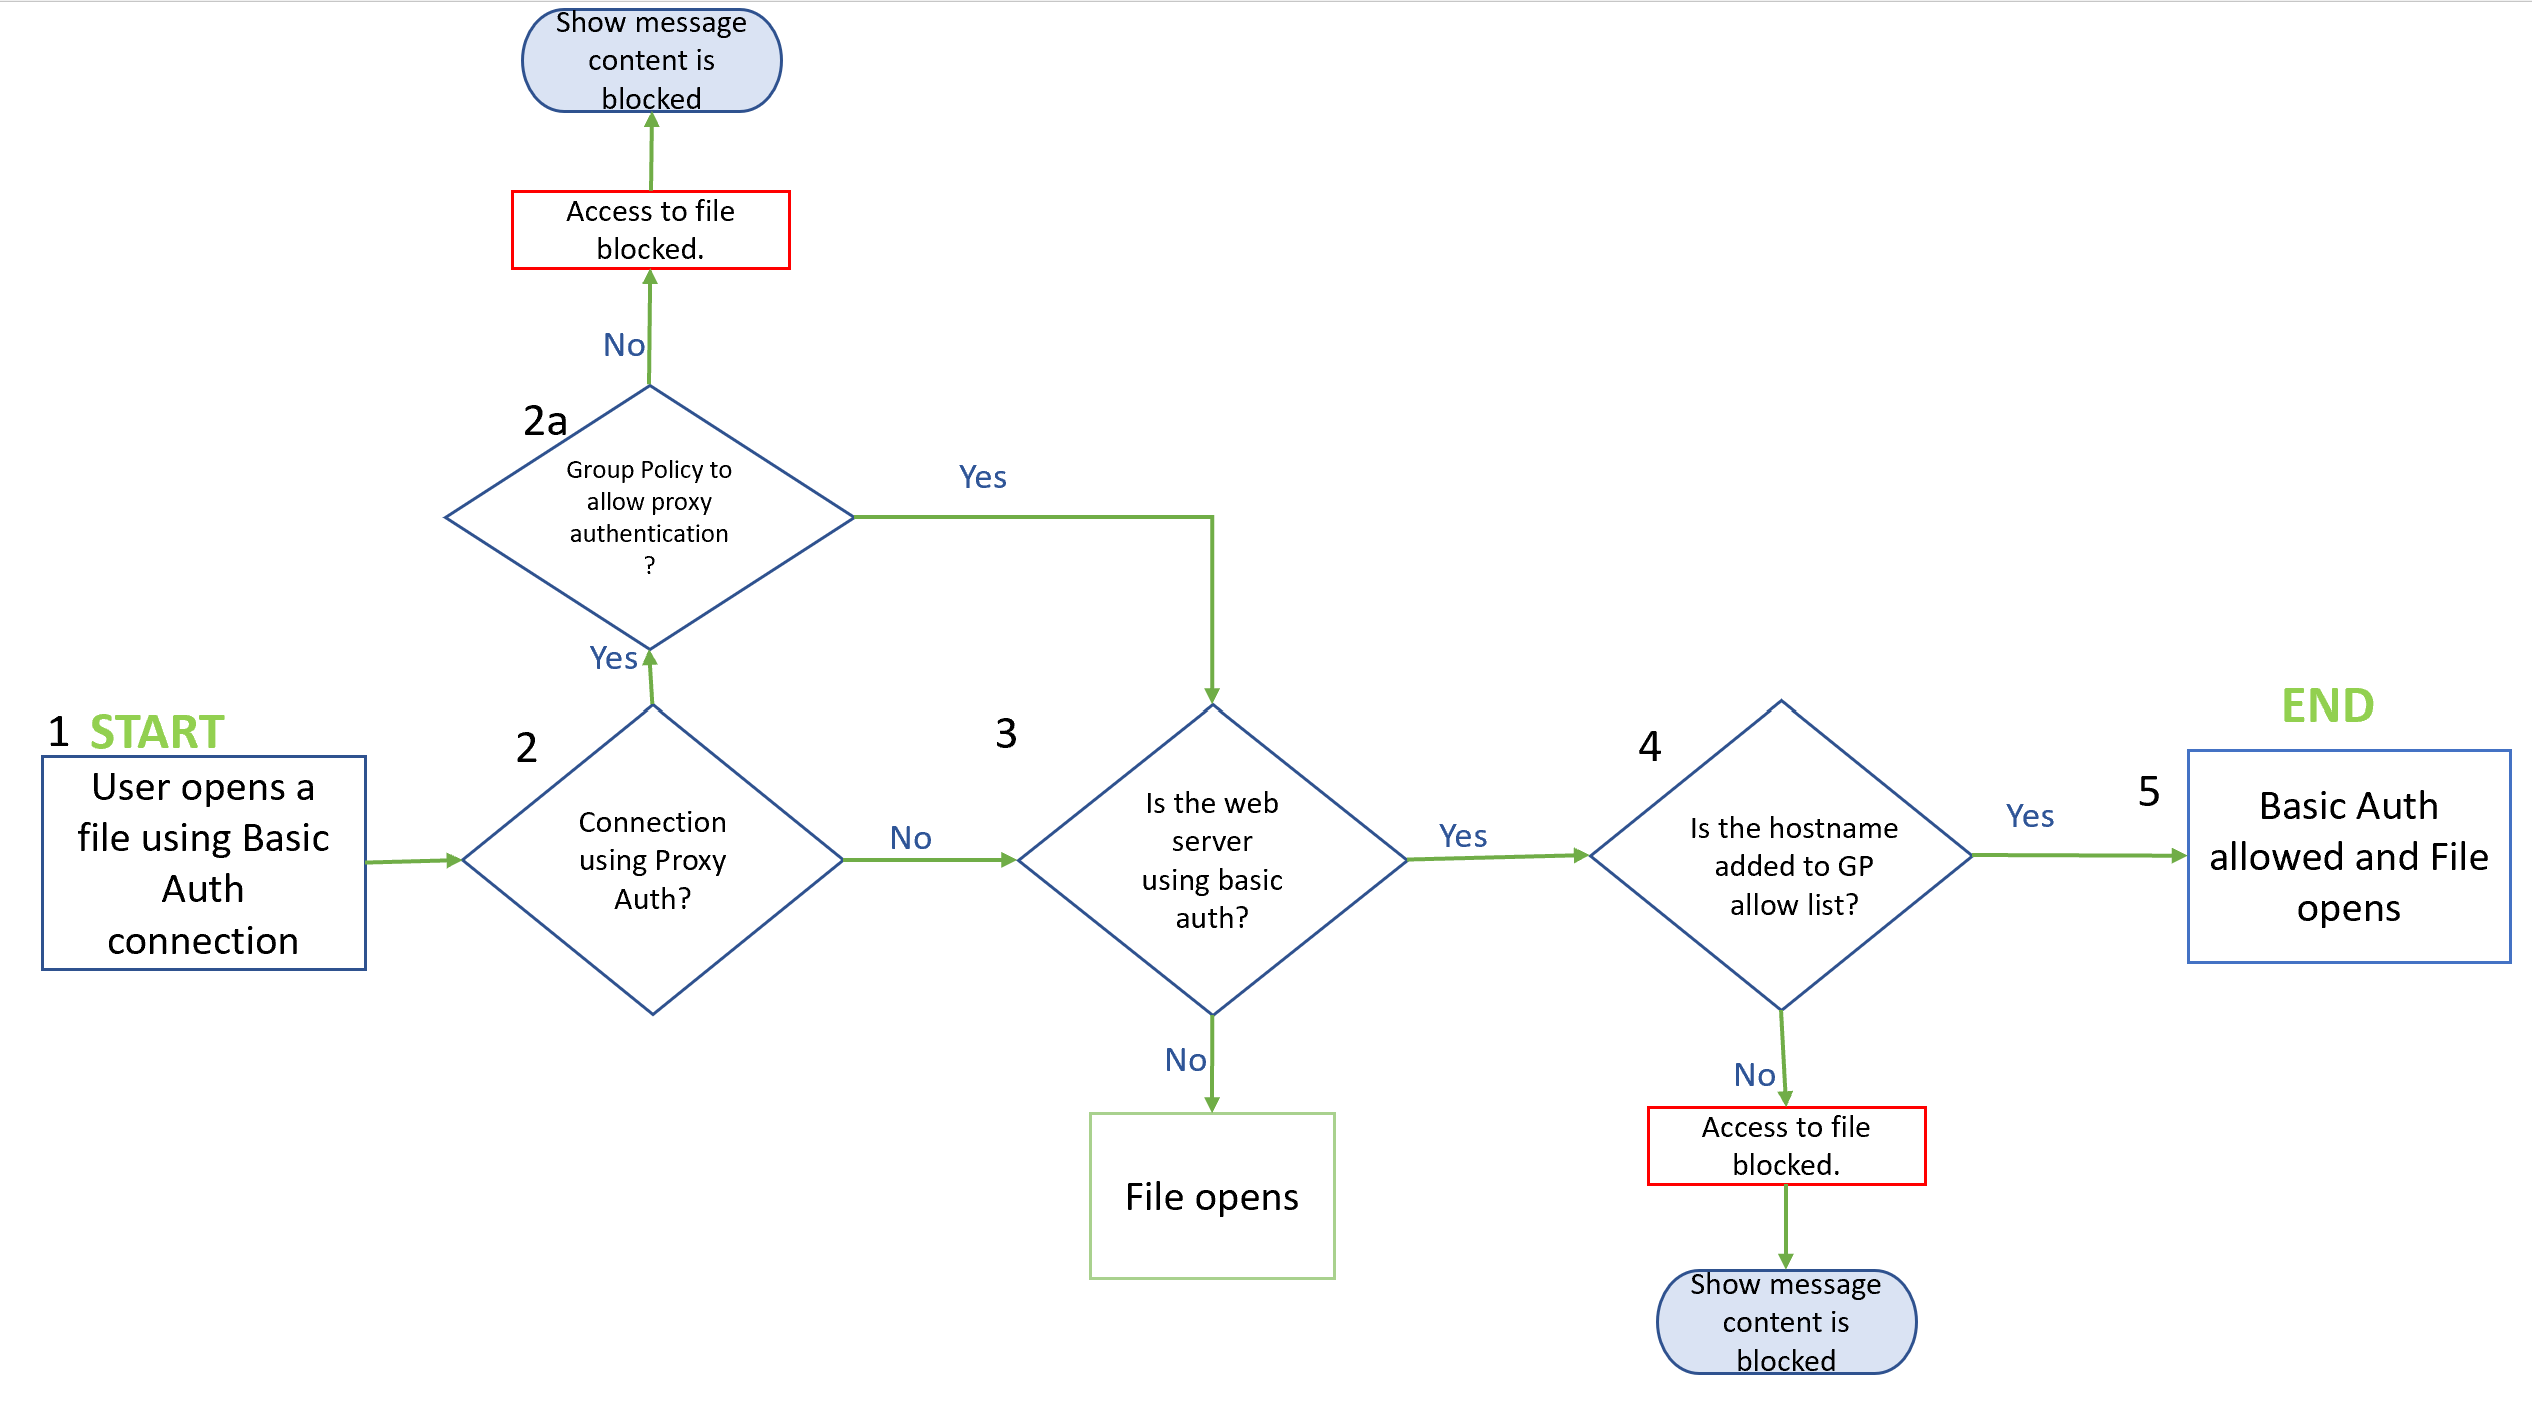 A screenshot of a flowchart illustrating the steps and conditions for accessing a file using a Basic Auth connection, including conditions for blocking or allowing access.